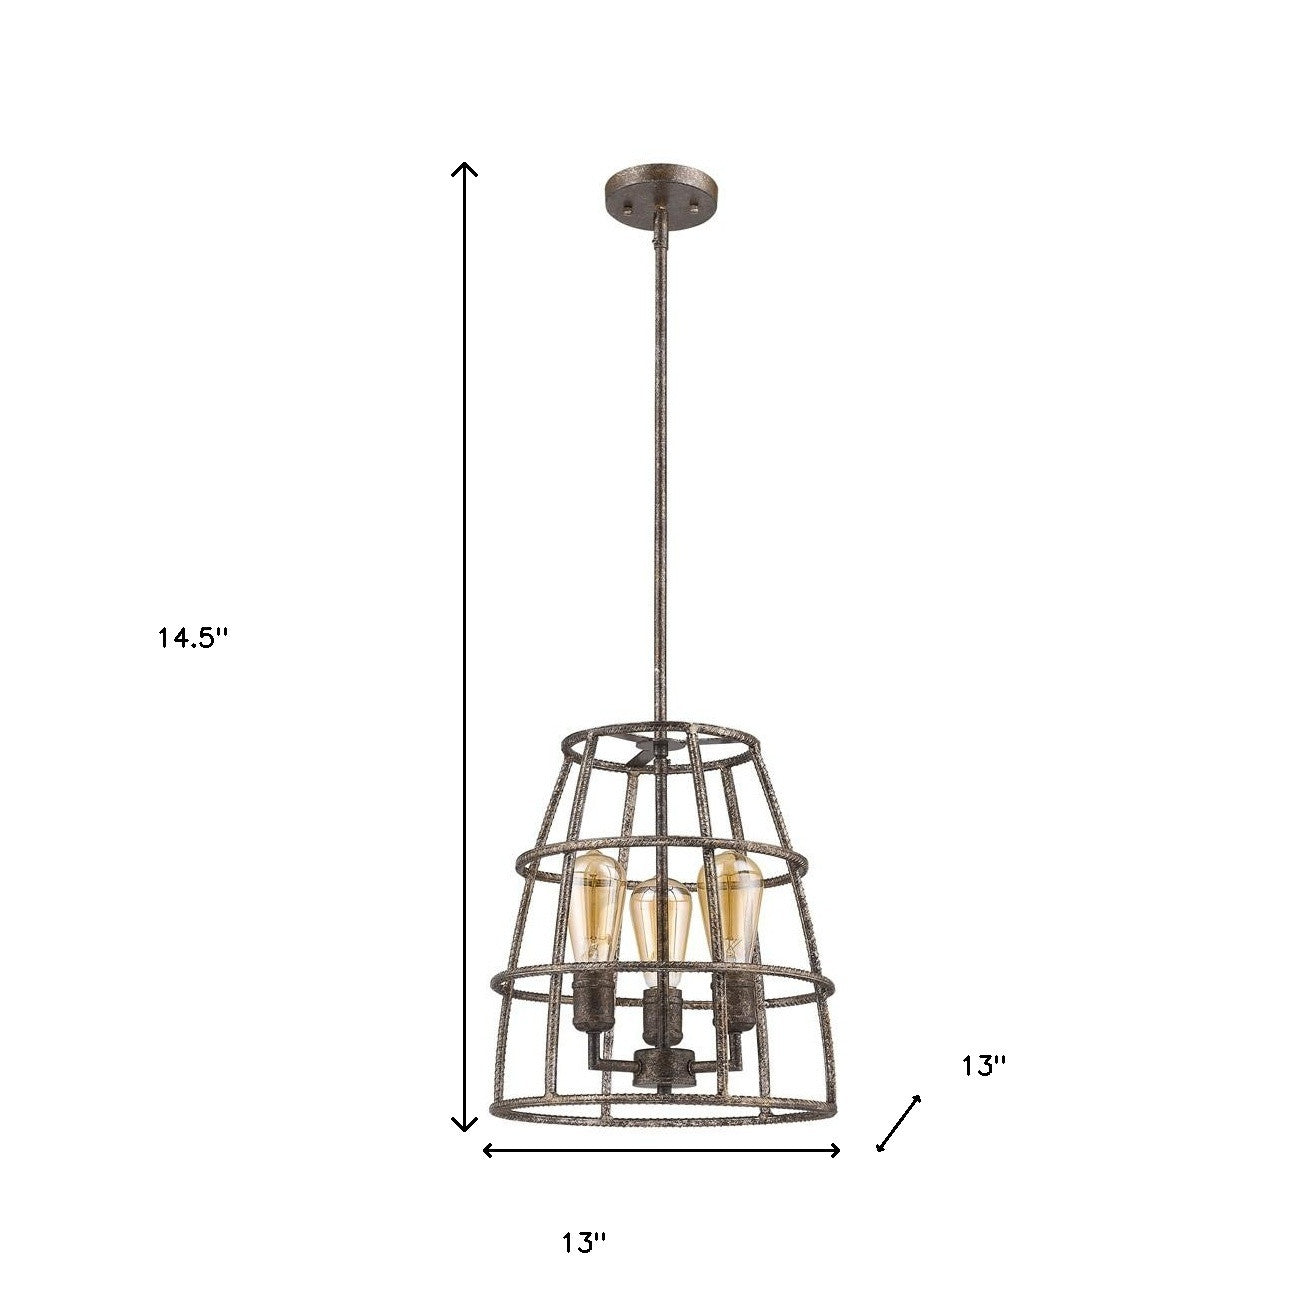 Rebarre 3-Light Antique Silver Drum Pendant With Open Cage Shade